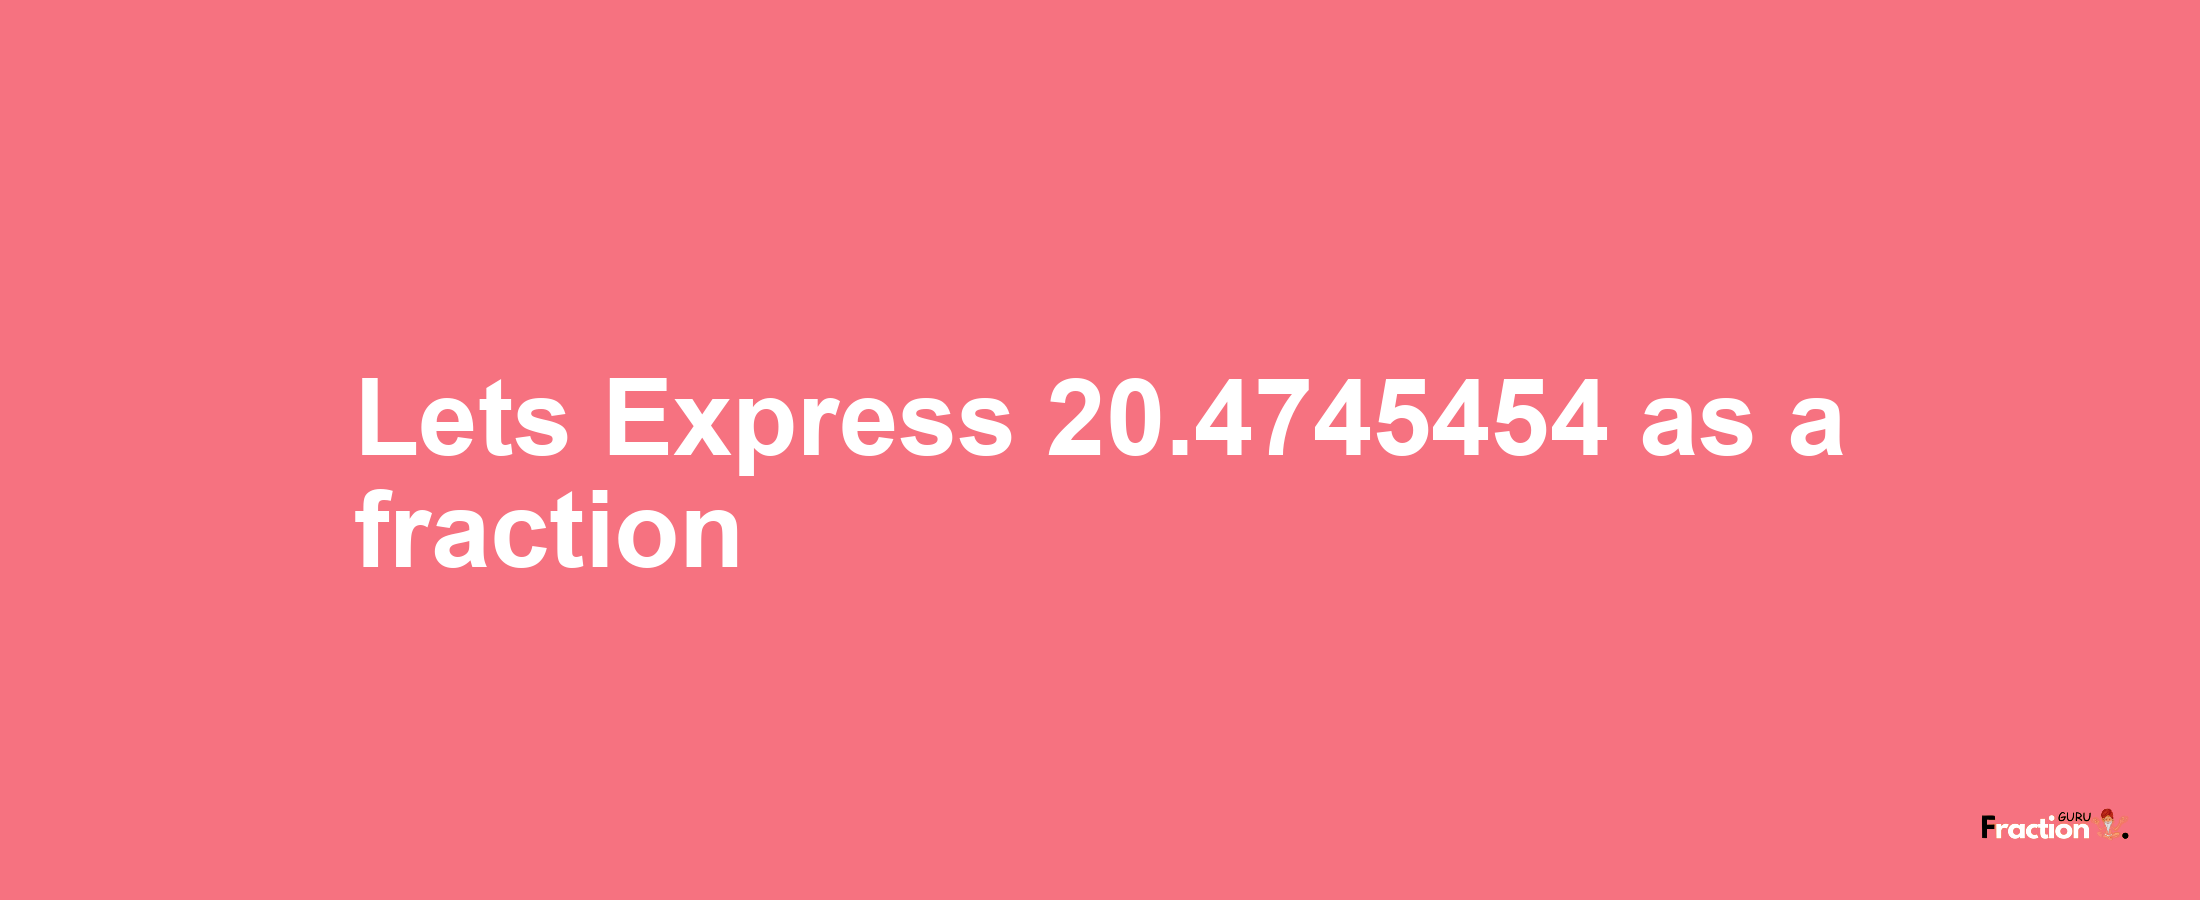 Lets Express 20.4745454 as afraction